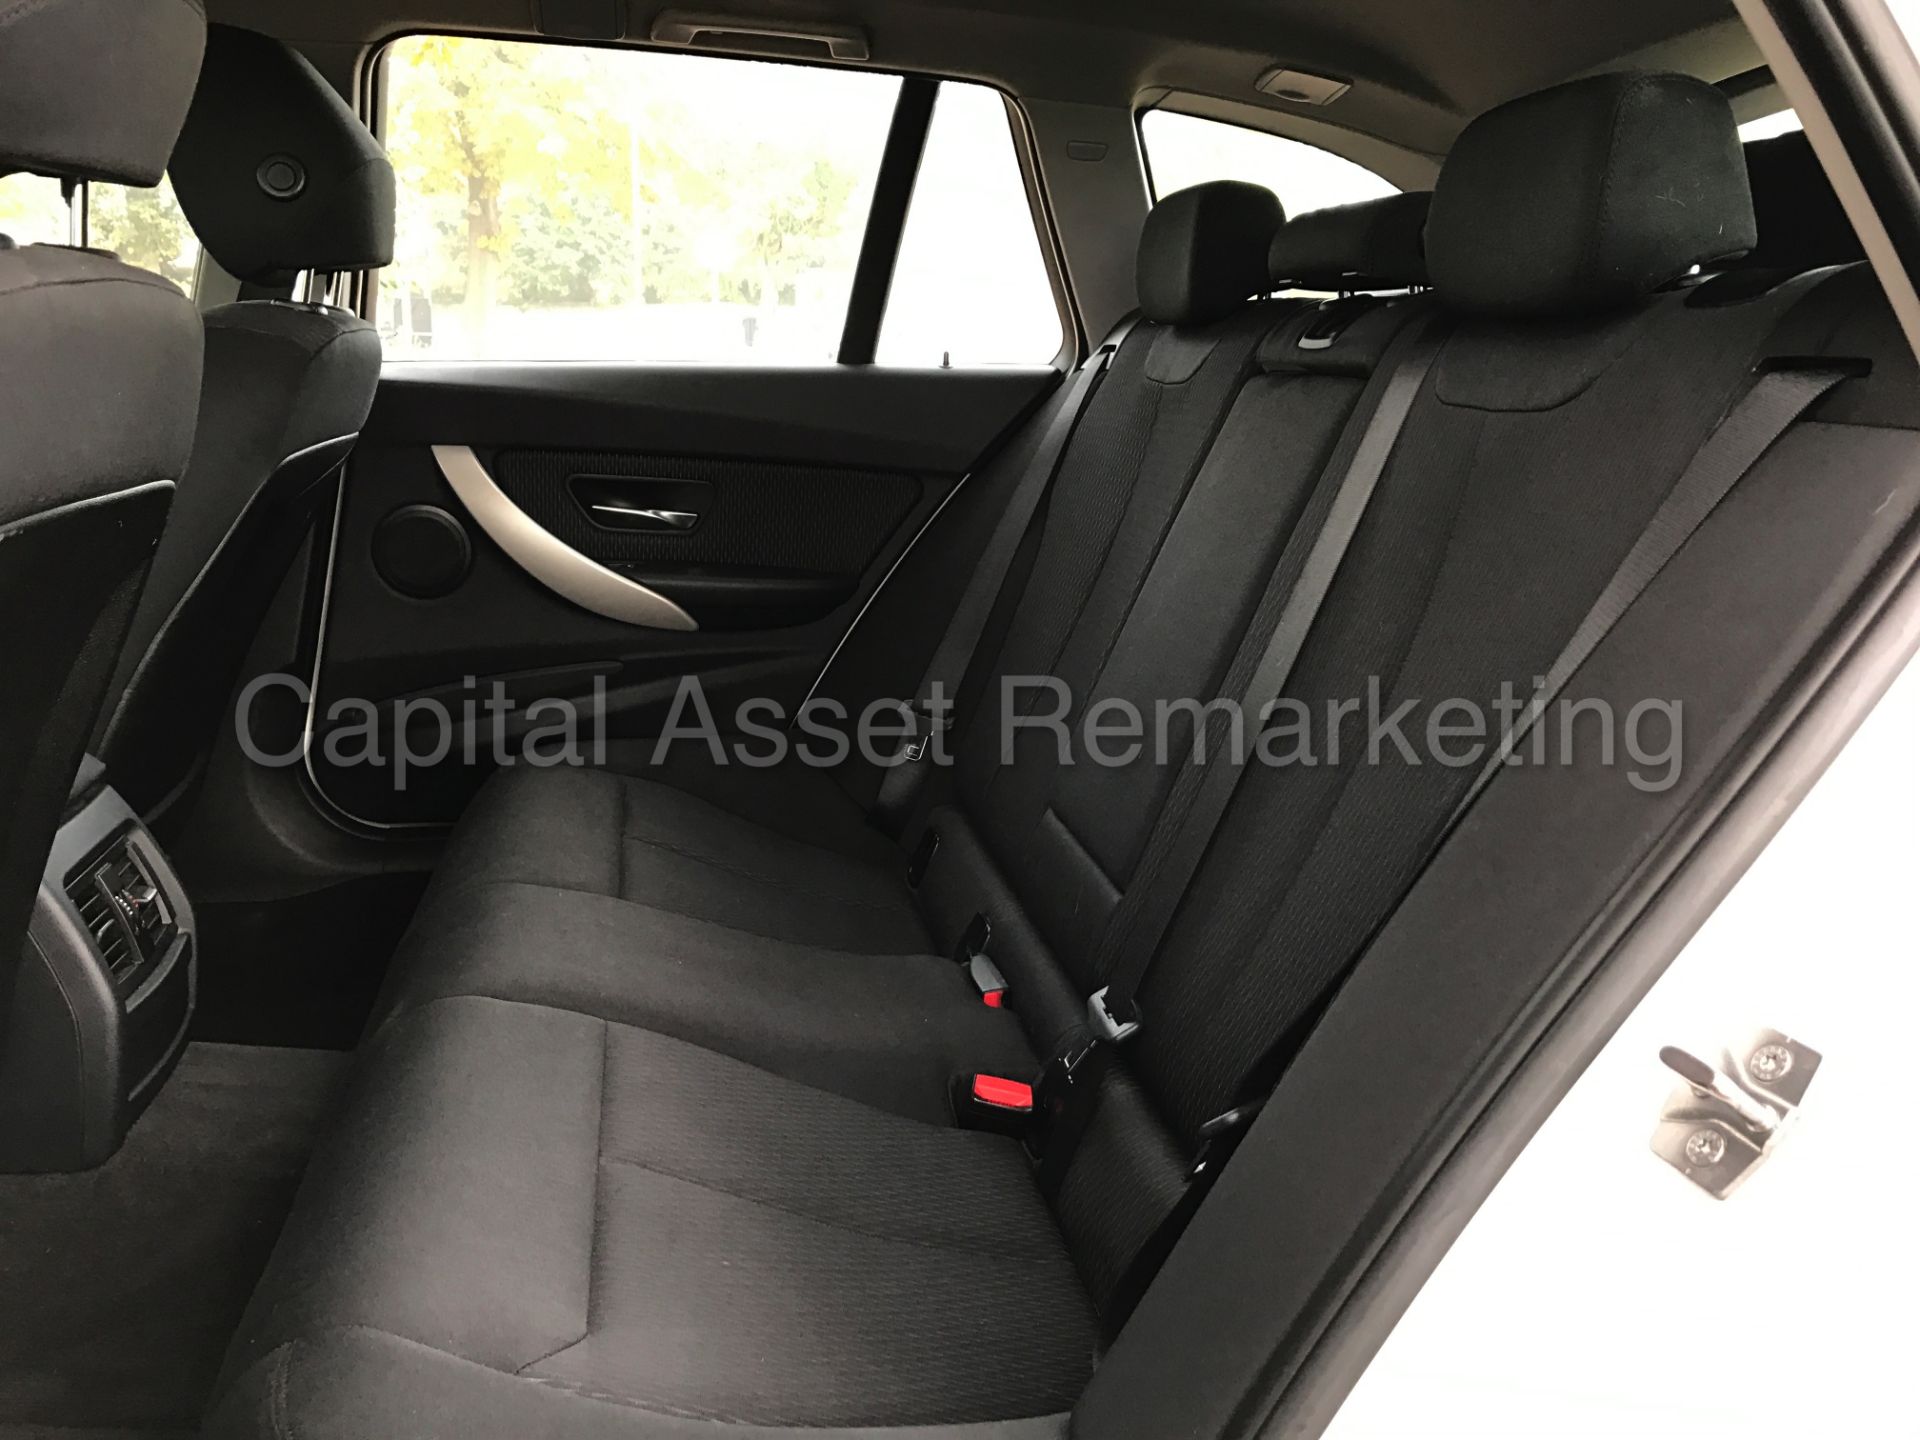 BMW 320d 'ESTATE / TOURING' (2014 MODEL) 8 SPEED AUTO - SAT NAV **FULLY LOADED** (1 OWNER FROM NEW) - Image 18 of 25